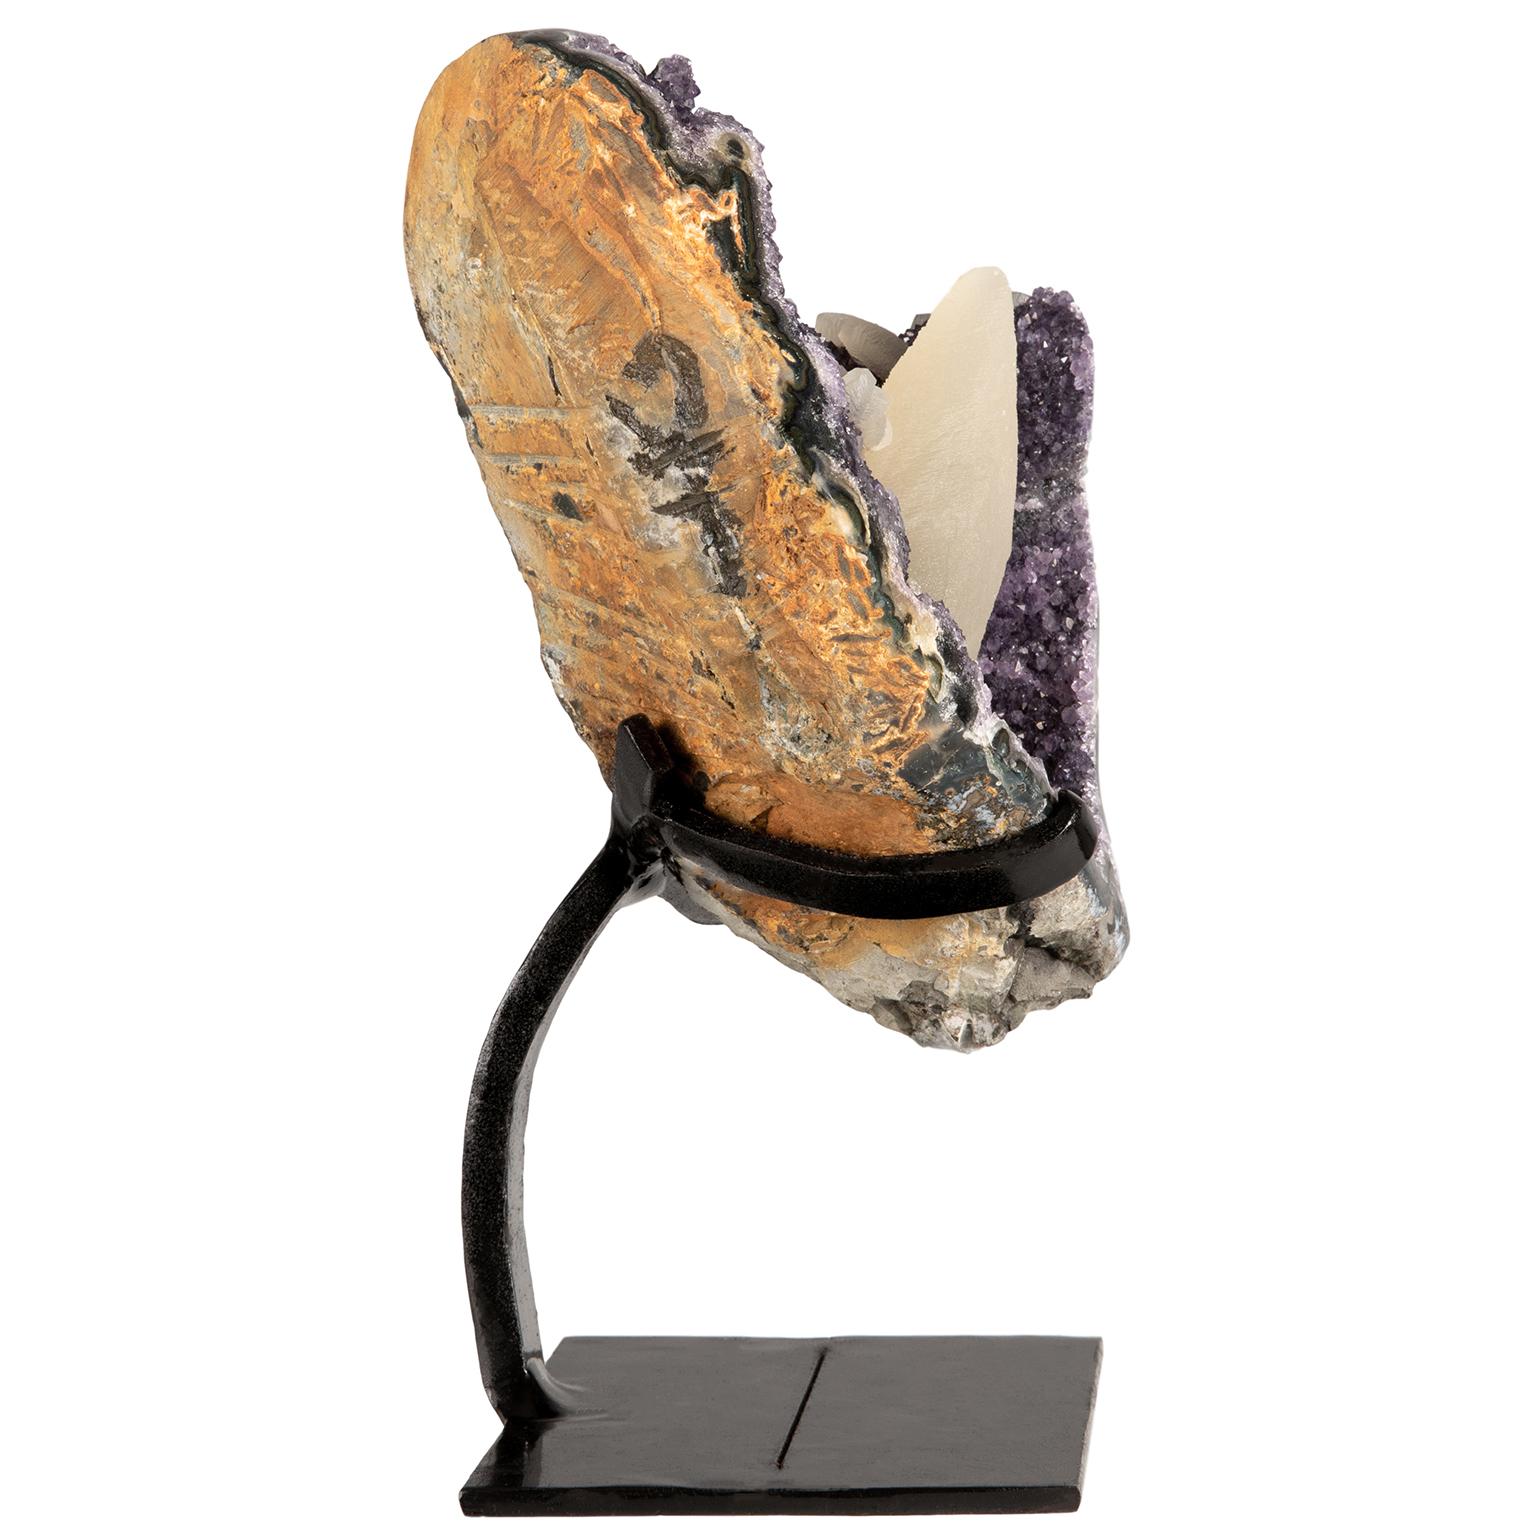 An exquisite and rare rough amethyst cluster with a calcite formation on a customized metal stand.

This stunning piece displays all the different layers of minerals. A beautiful mix of color with purple amethyst, blue agate, white quartz and the